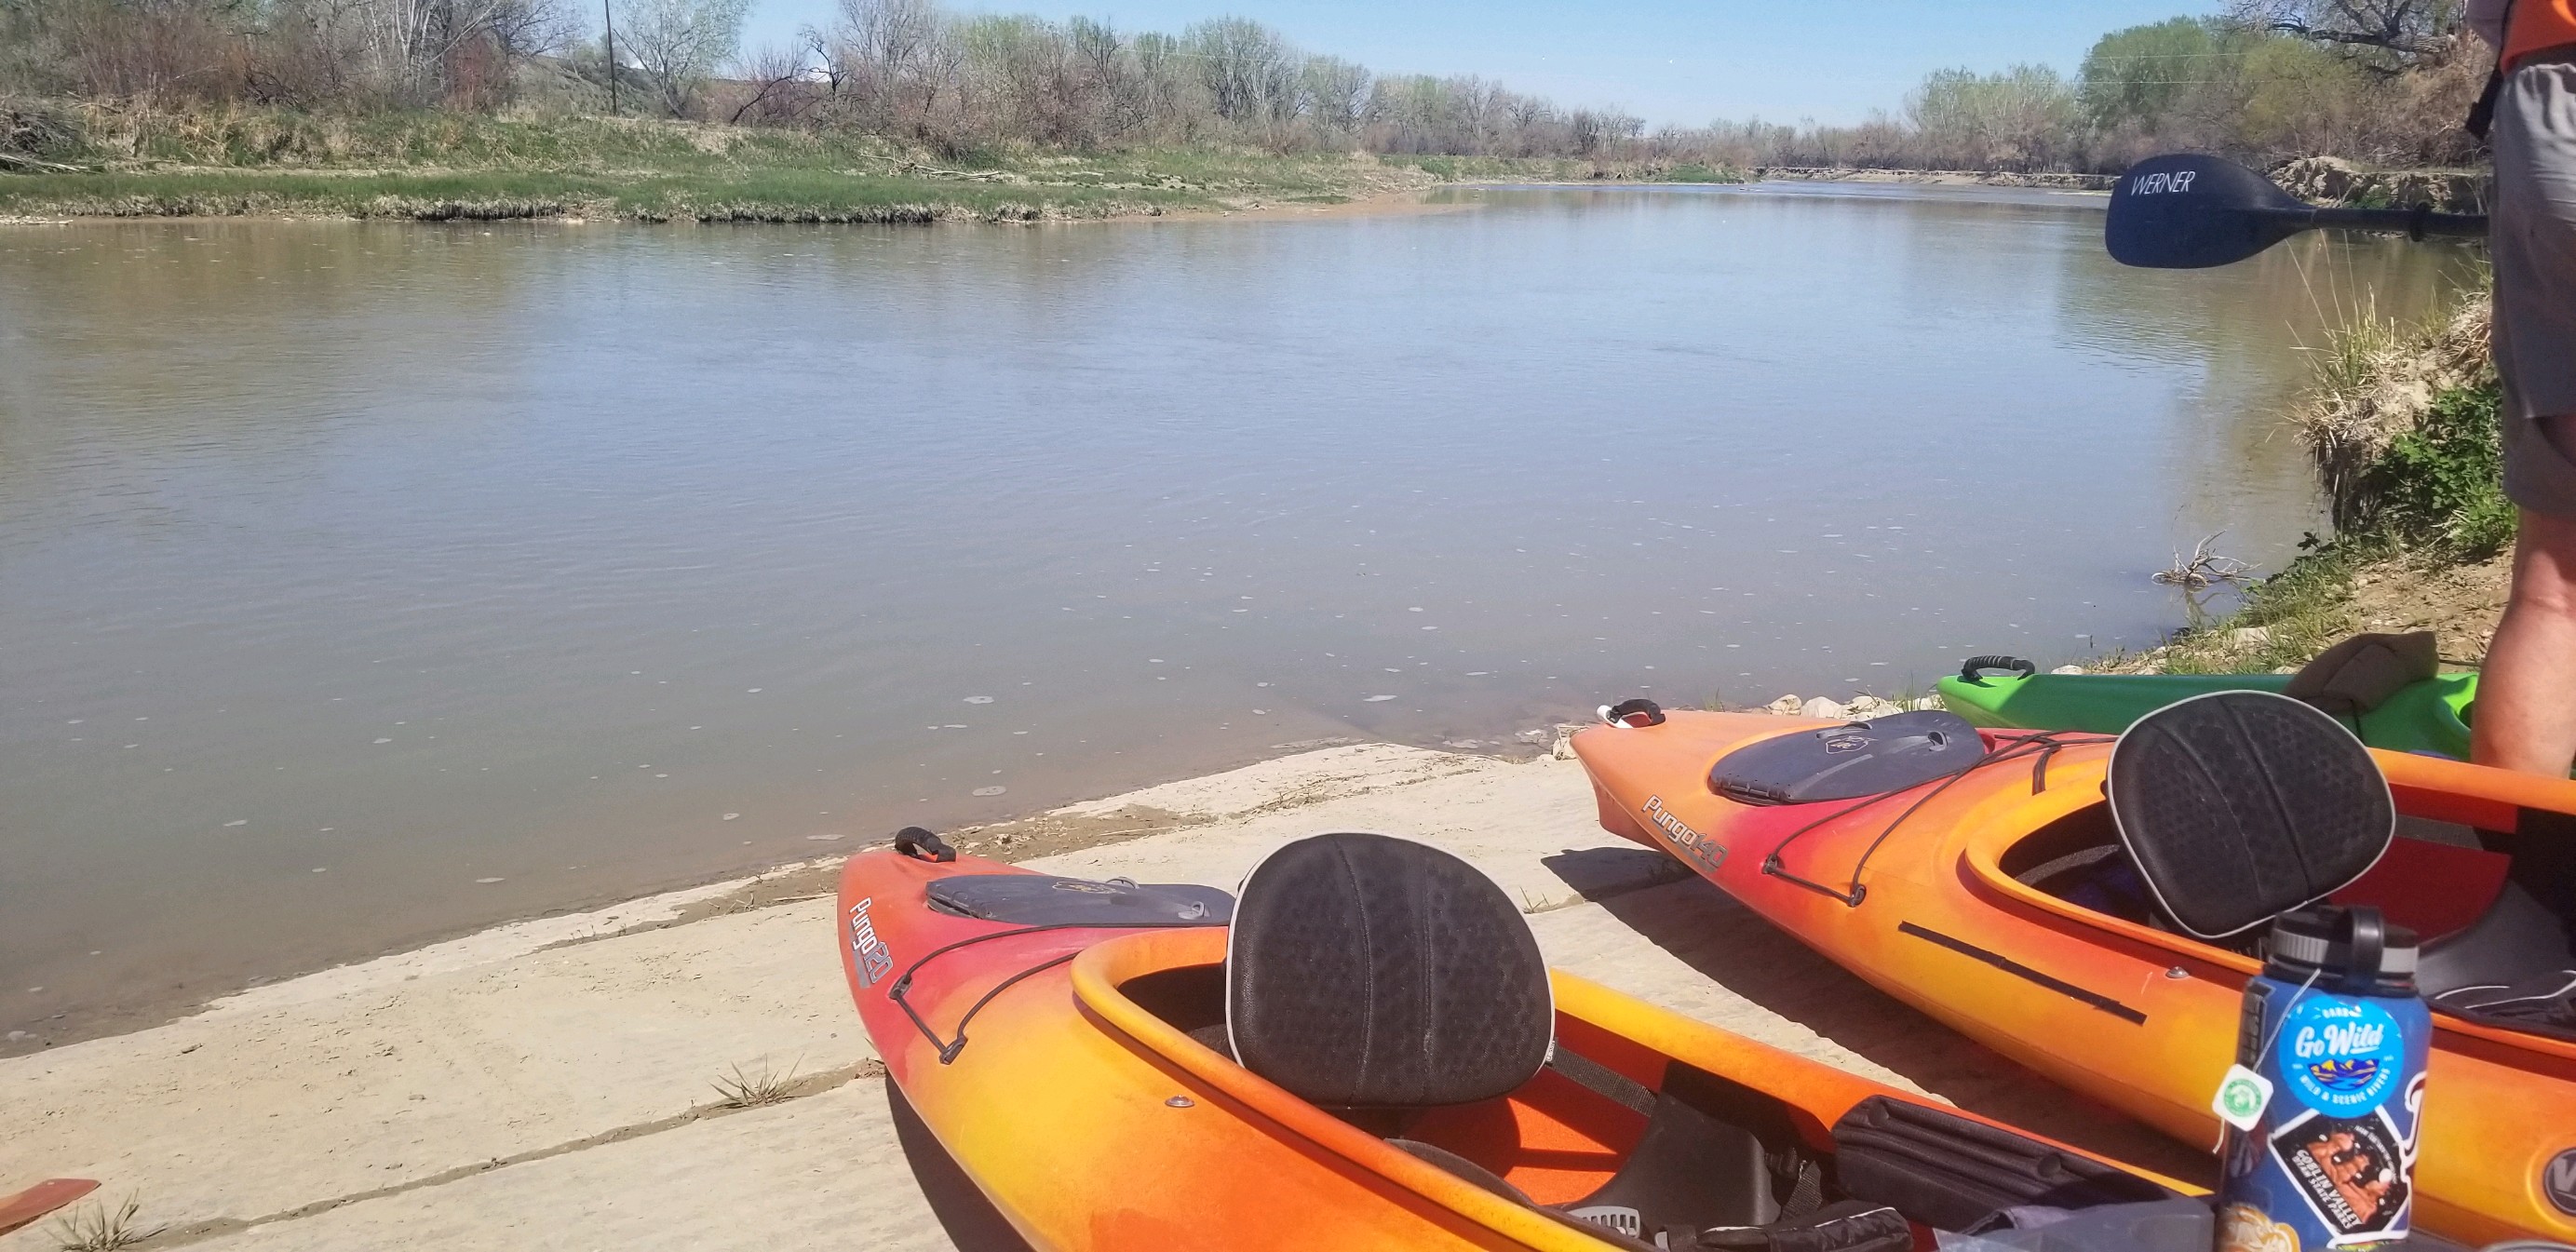 Two orange kayaks sit on a concrete boat ramp next to the river.